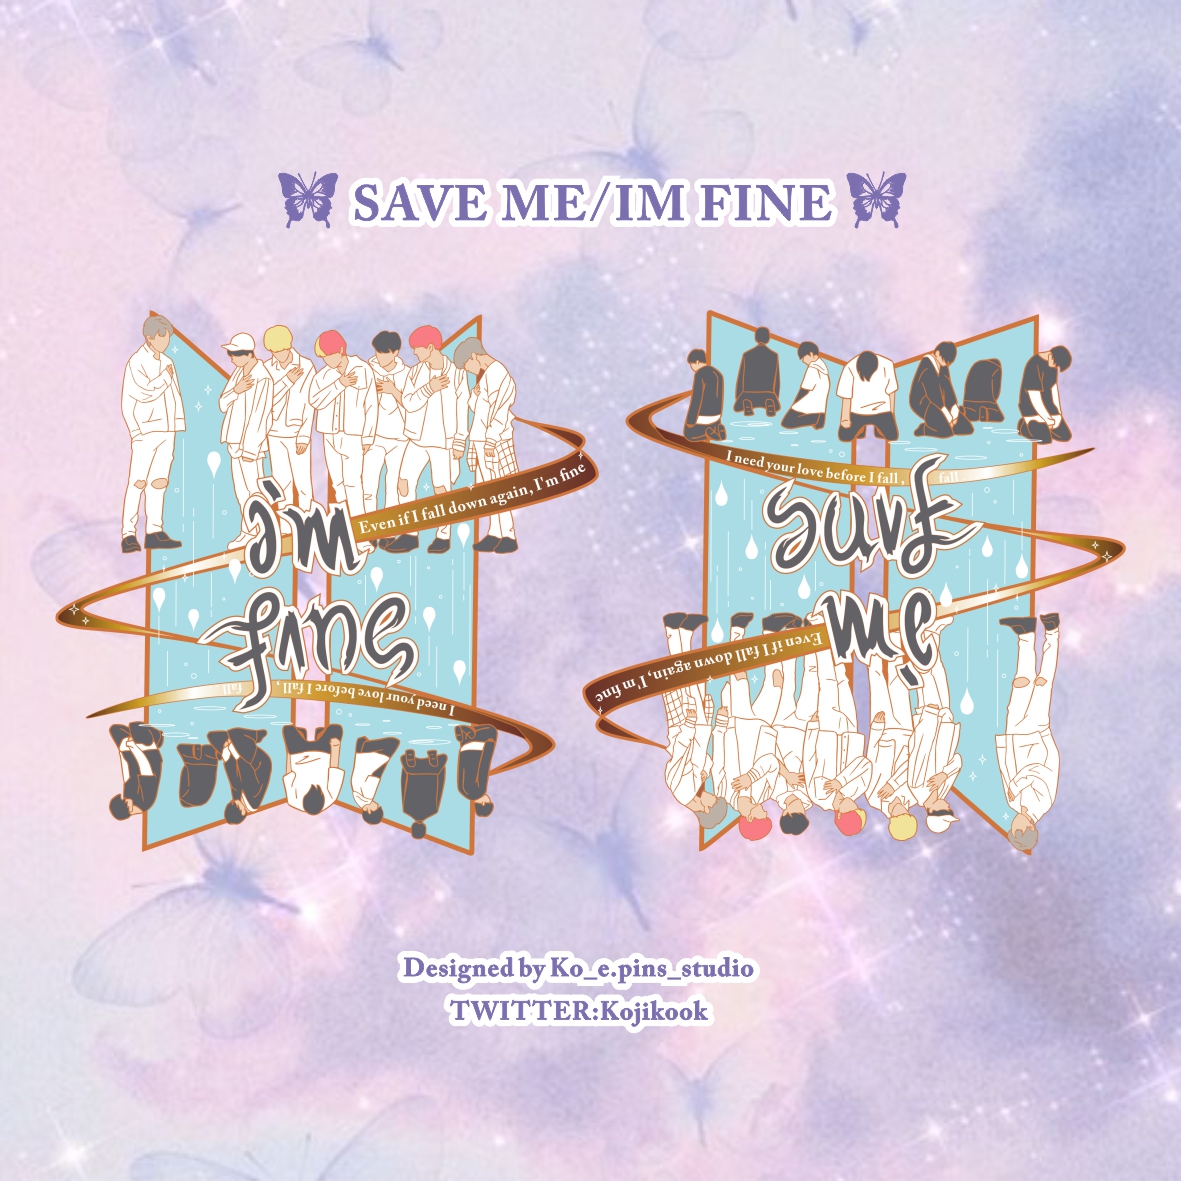 Save me/im fine will have a new color coming soon...  old design success restock 20pcs too 🐥📷📷📷#bts #btspin #btspins #pin #pins #enamelpin #enamelpins #btsfanart #smallbusiness #kpop #kpoppin #btspins #btspincollection #btscollection #btsjewelry